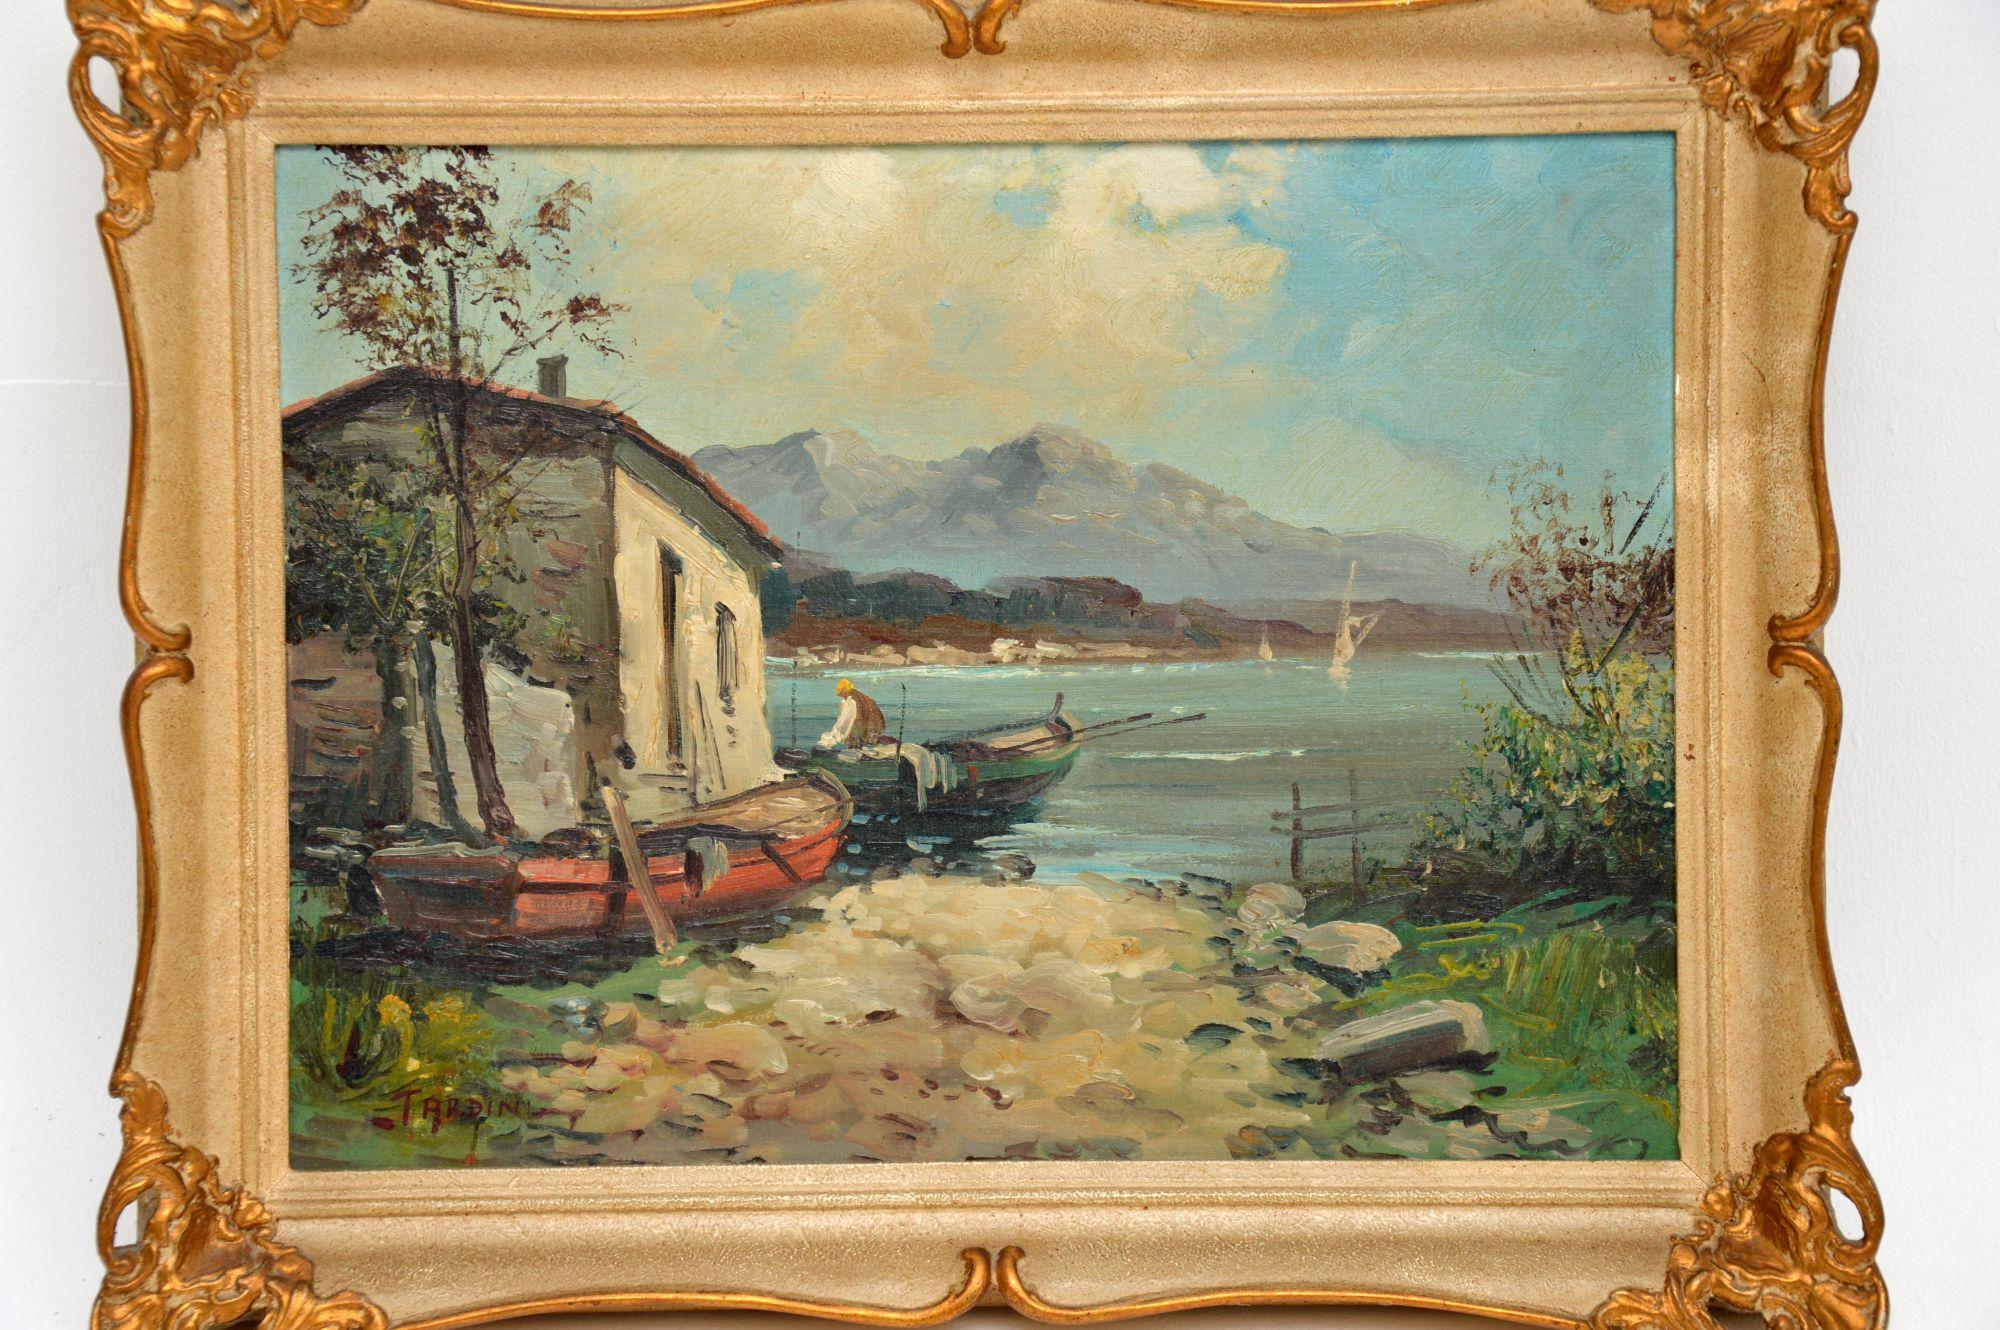 Late 19th Century Antique Italian Landscape Oil Painting by 'Tardini'